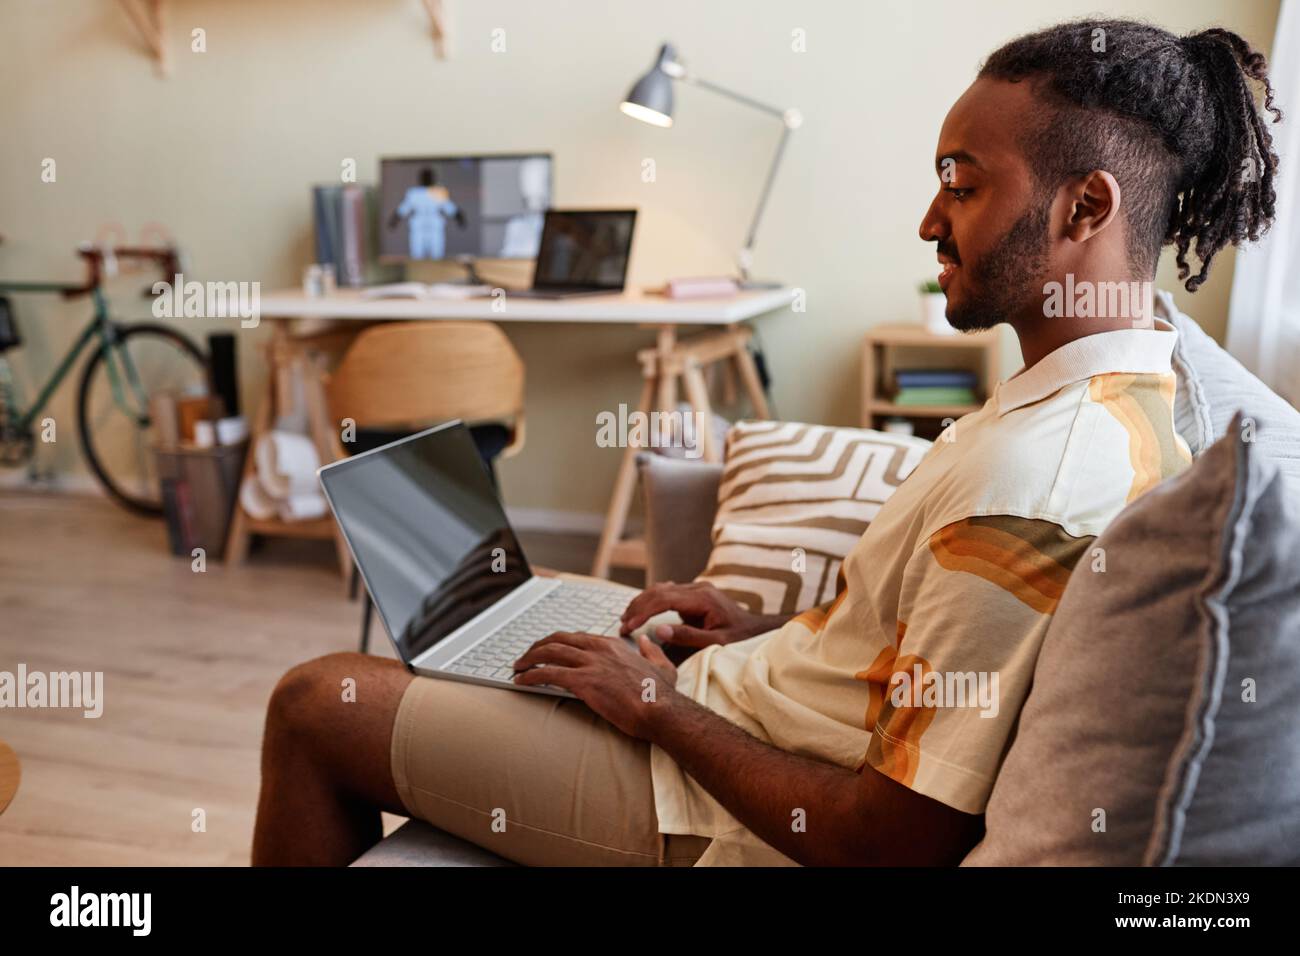 Side view portrait of creative black man using laptop while sitting on sofa and smiling at blank screen Stock Photo